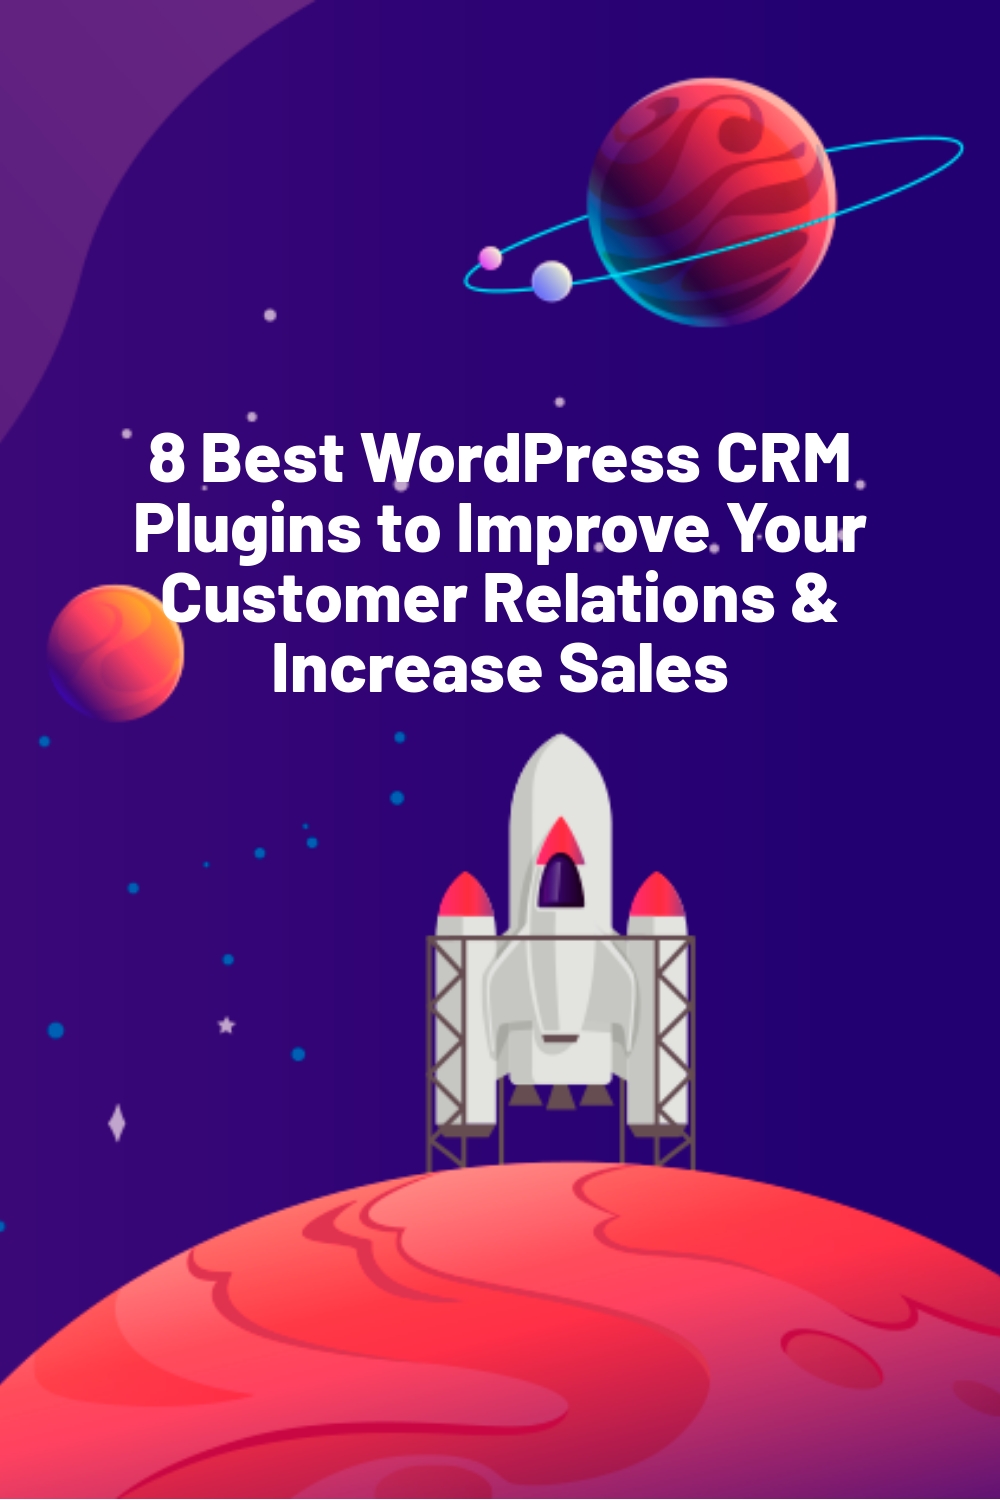 8 Best WordPress CRM Plugins to Improve Your Customer Relations & Increase Sales